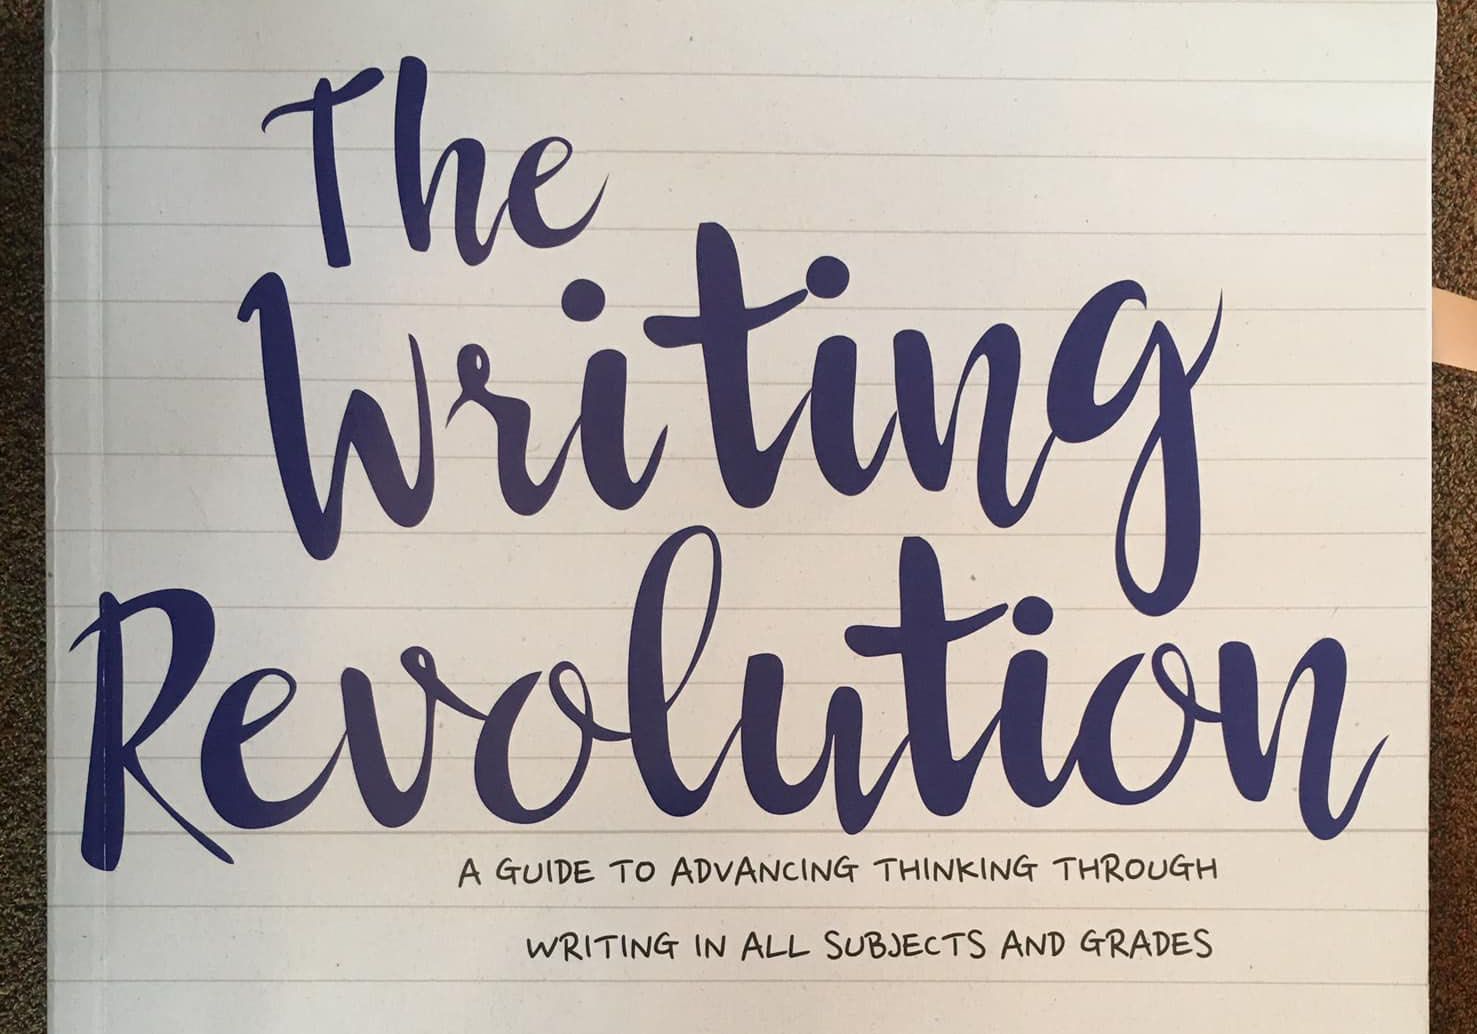 the writing revolution book review